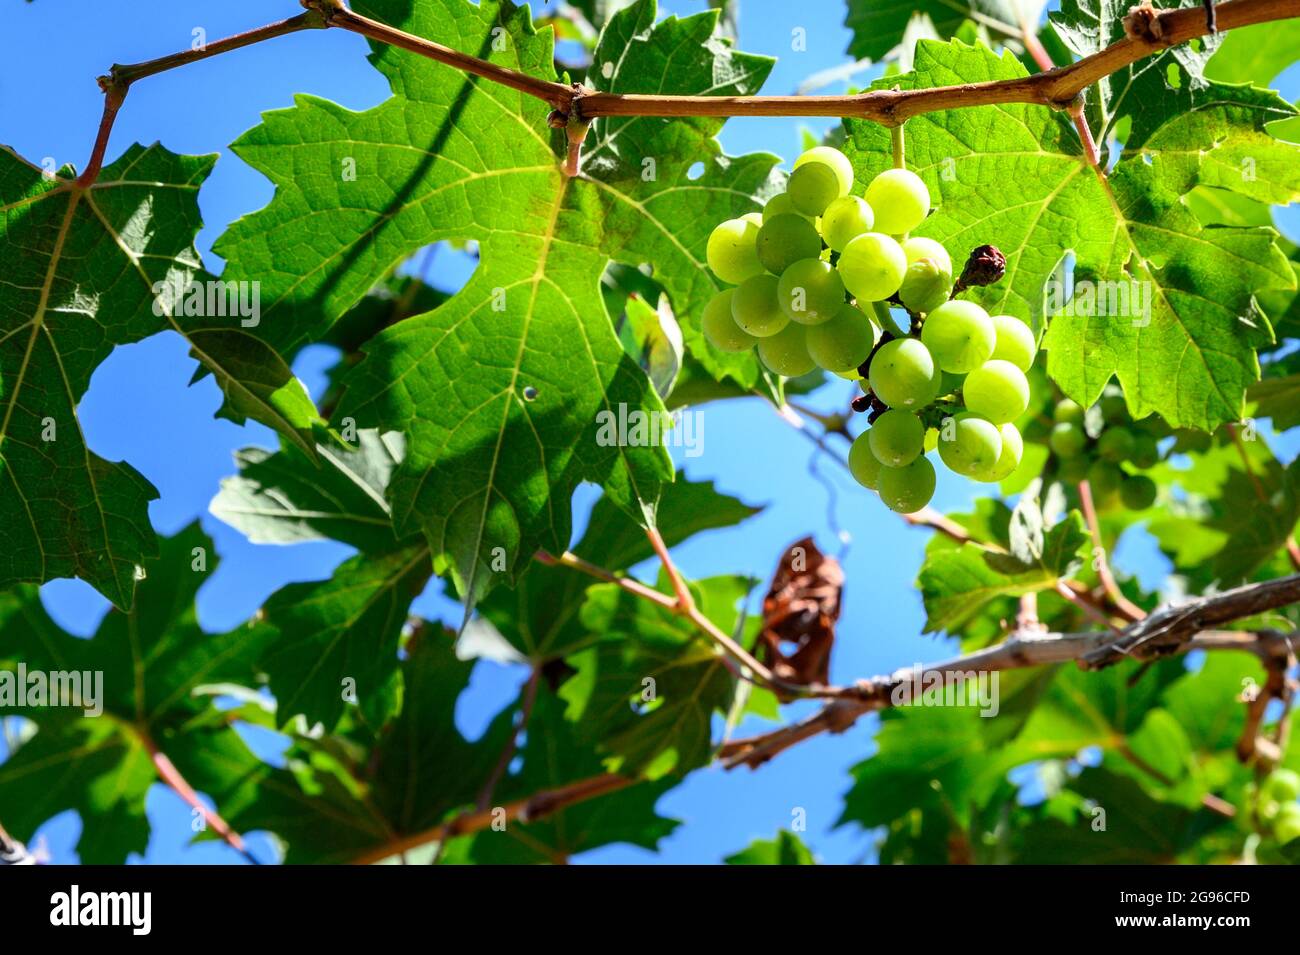 Close up of green white wine grapes in a vineyard crop ready to be harvested. Green leafs around the grapes, sunny day. Stock Photo